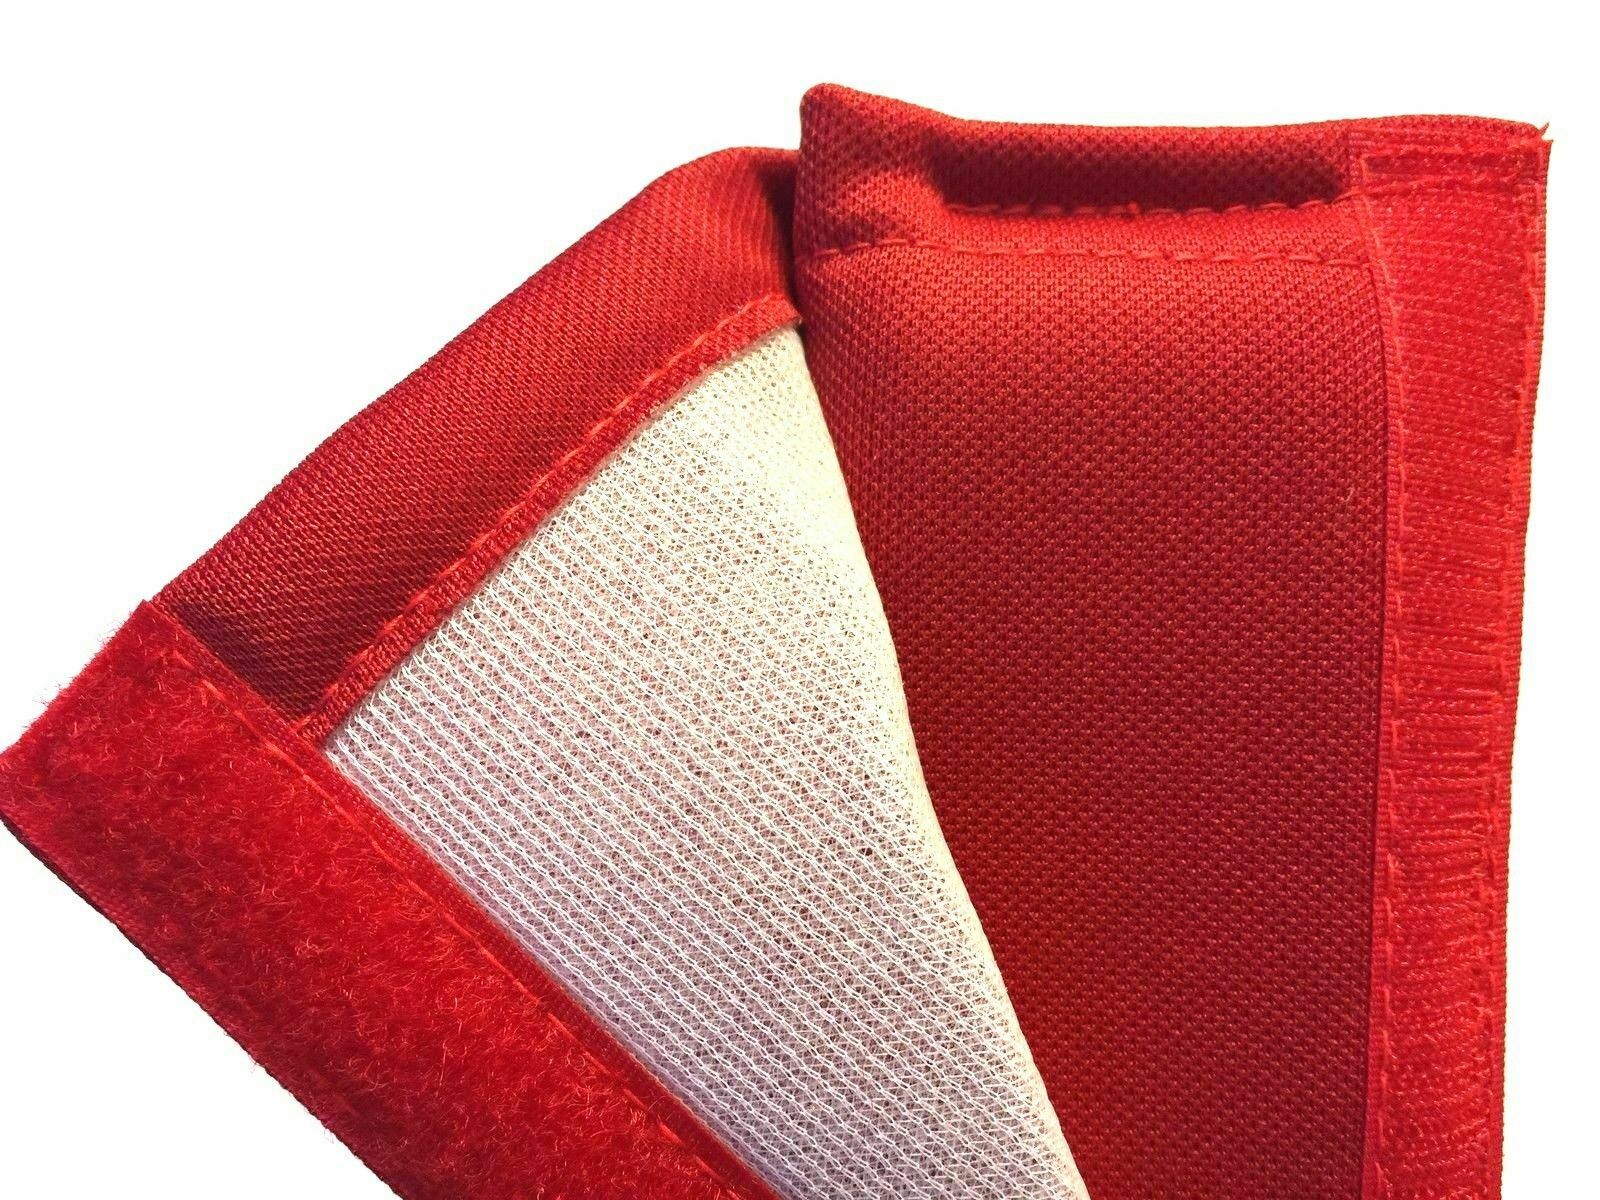 Honda ASIMO Seatbelt Cover Set for Kei Trucks - RED - Comfortable, Embroidered Cotton, Universal Fit, Easy to Install, Stylish Protection